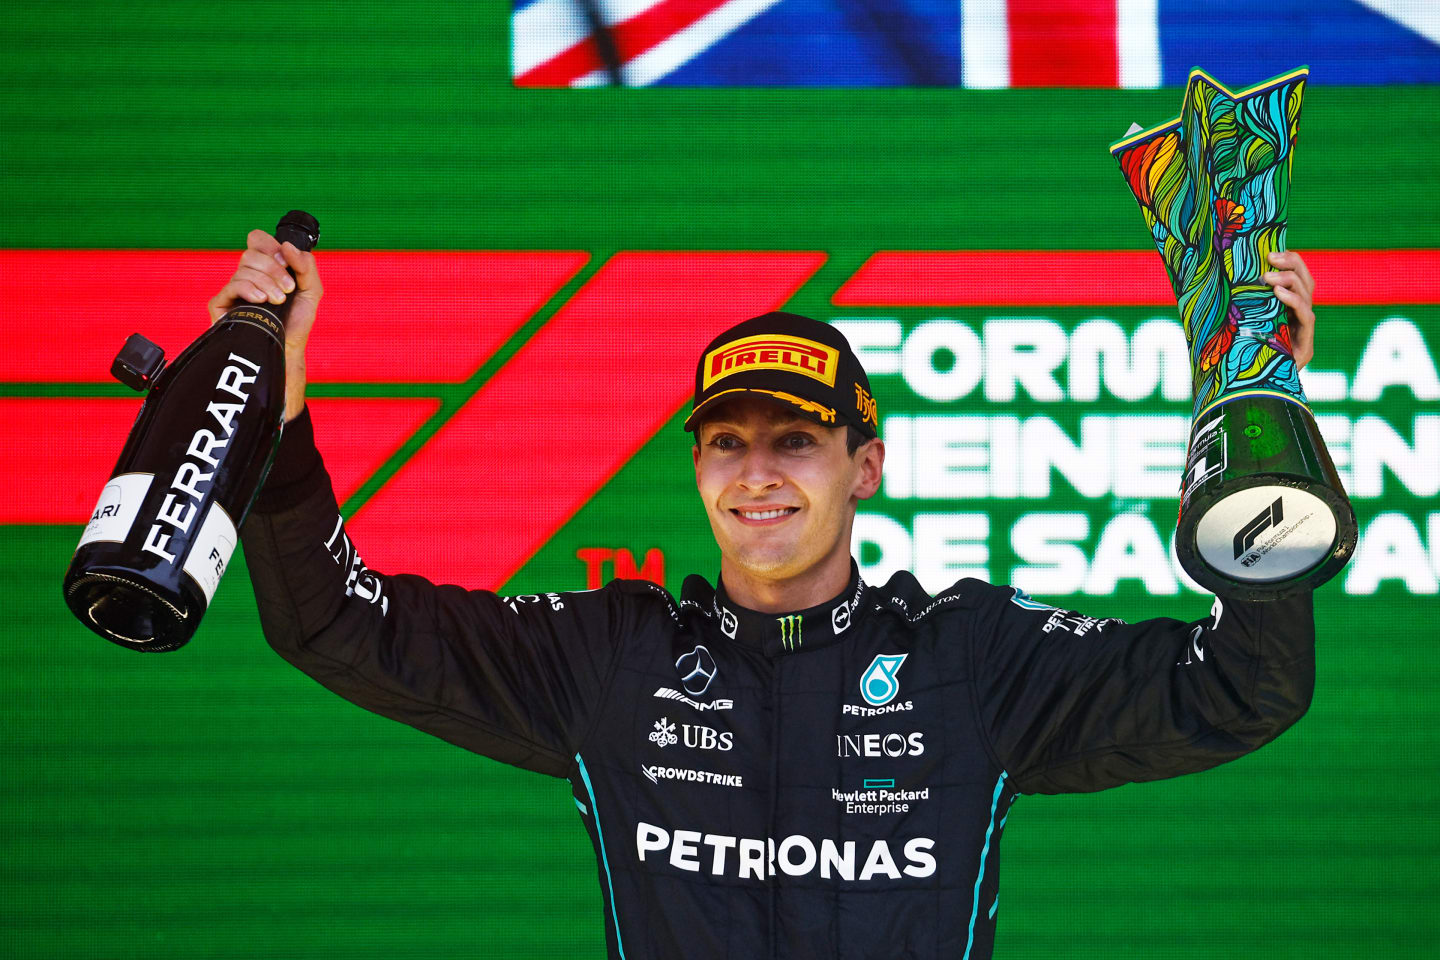 SAO PAULO, BRAZIL - NOVEMBER 13: Race winner George Russell of Great Britain and Mercedes celebrates on the podium during the F1 Grand Prix of Brazil at Autodromo Jose Carlos Pace on November 13, 2022 in Sao Paulo, Brazil. (Photo by Chris Graythen/Getty Images)